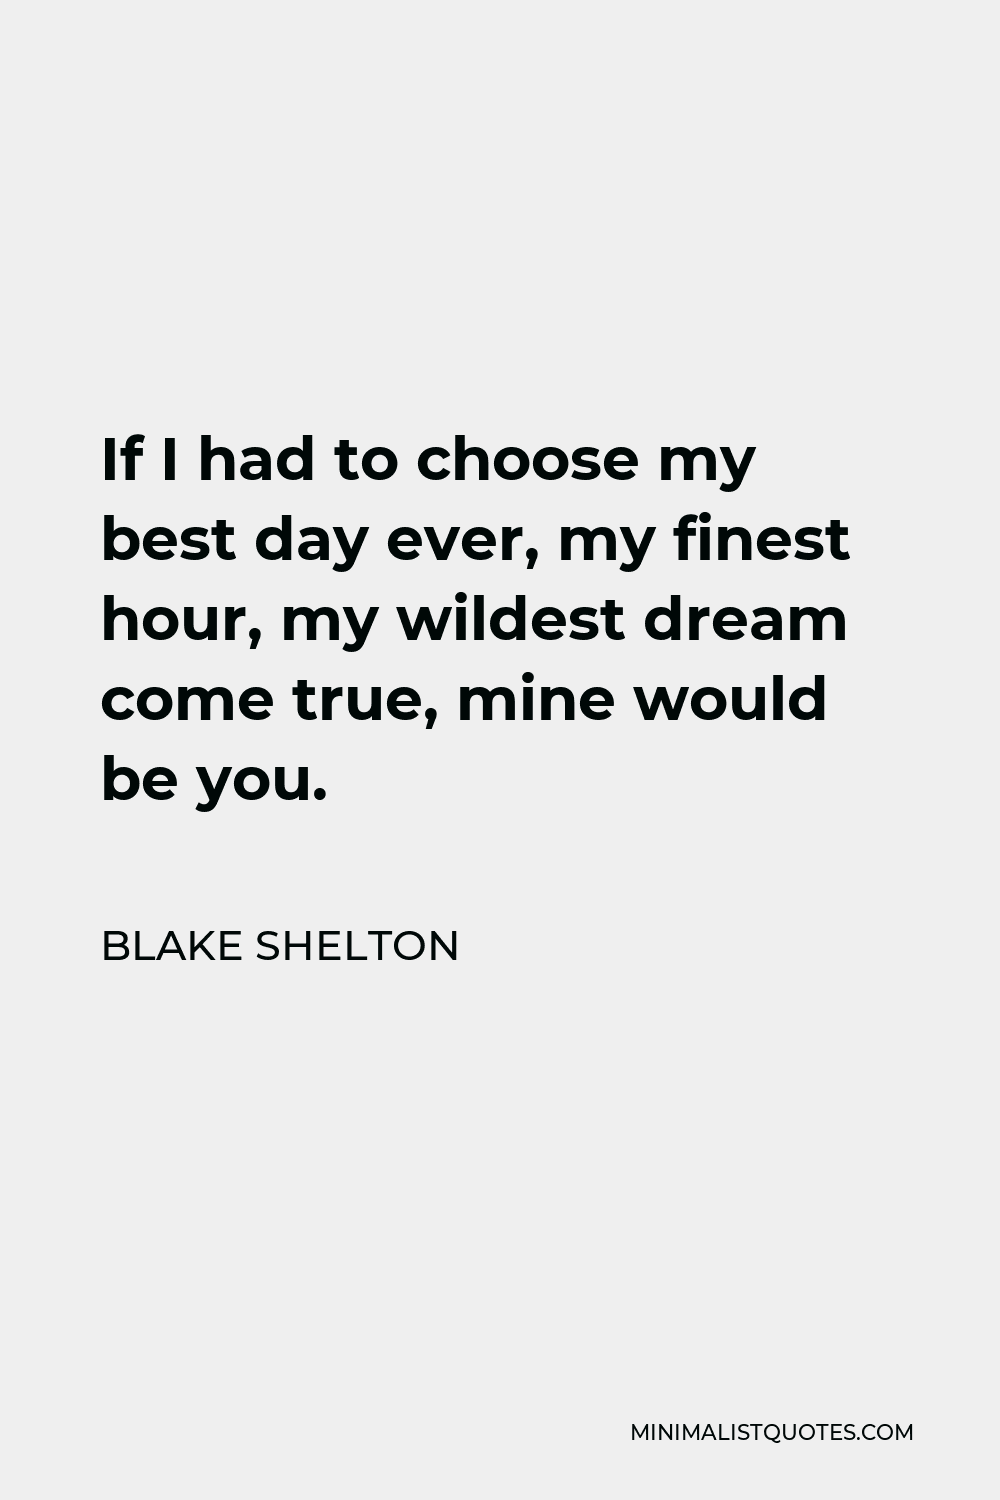 Blake Shelton Quote - If I had to choose my best day ever, my finest hour, my wildest dream come true, mine would be you.